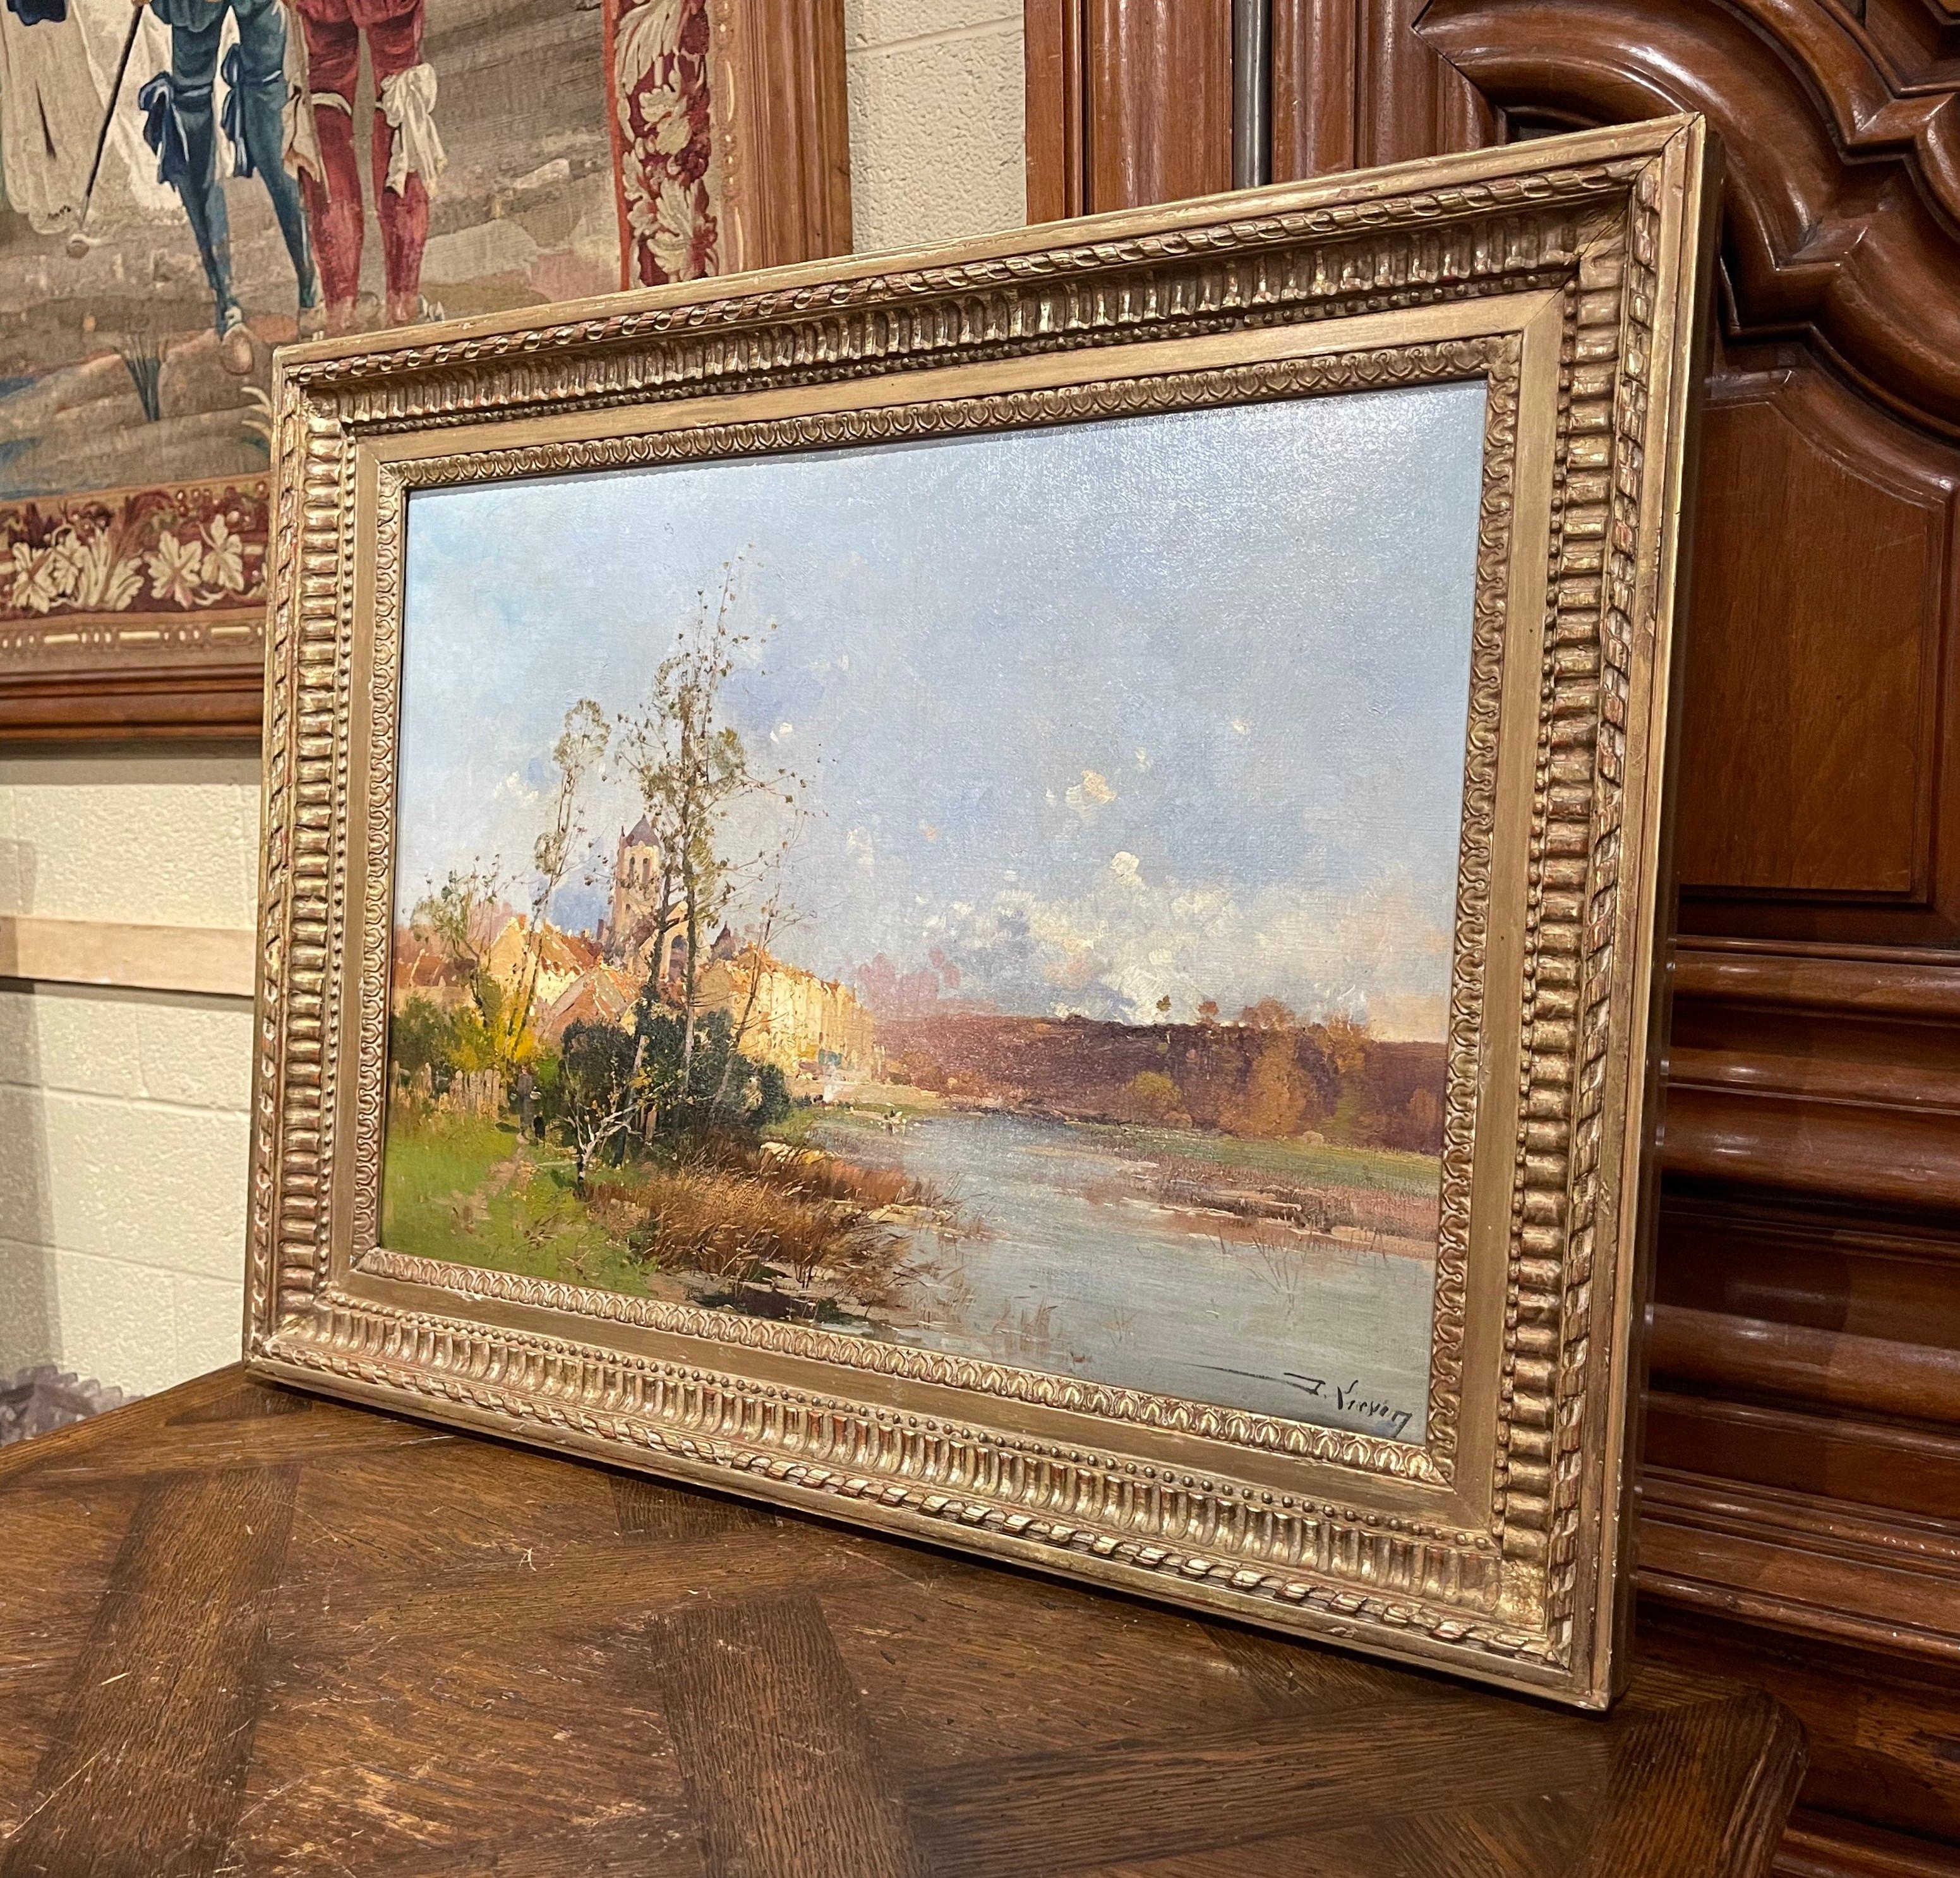 Decorate a study, living room or den with this beautiful and colorful antique painting! Painted in France circa 1890, the artwork painted on canvas is set in a carved gilt wood frame and illustrates a picturesque, countryside scene in rural France